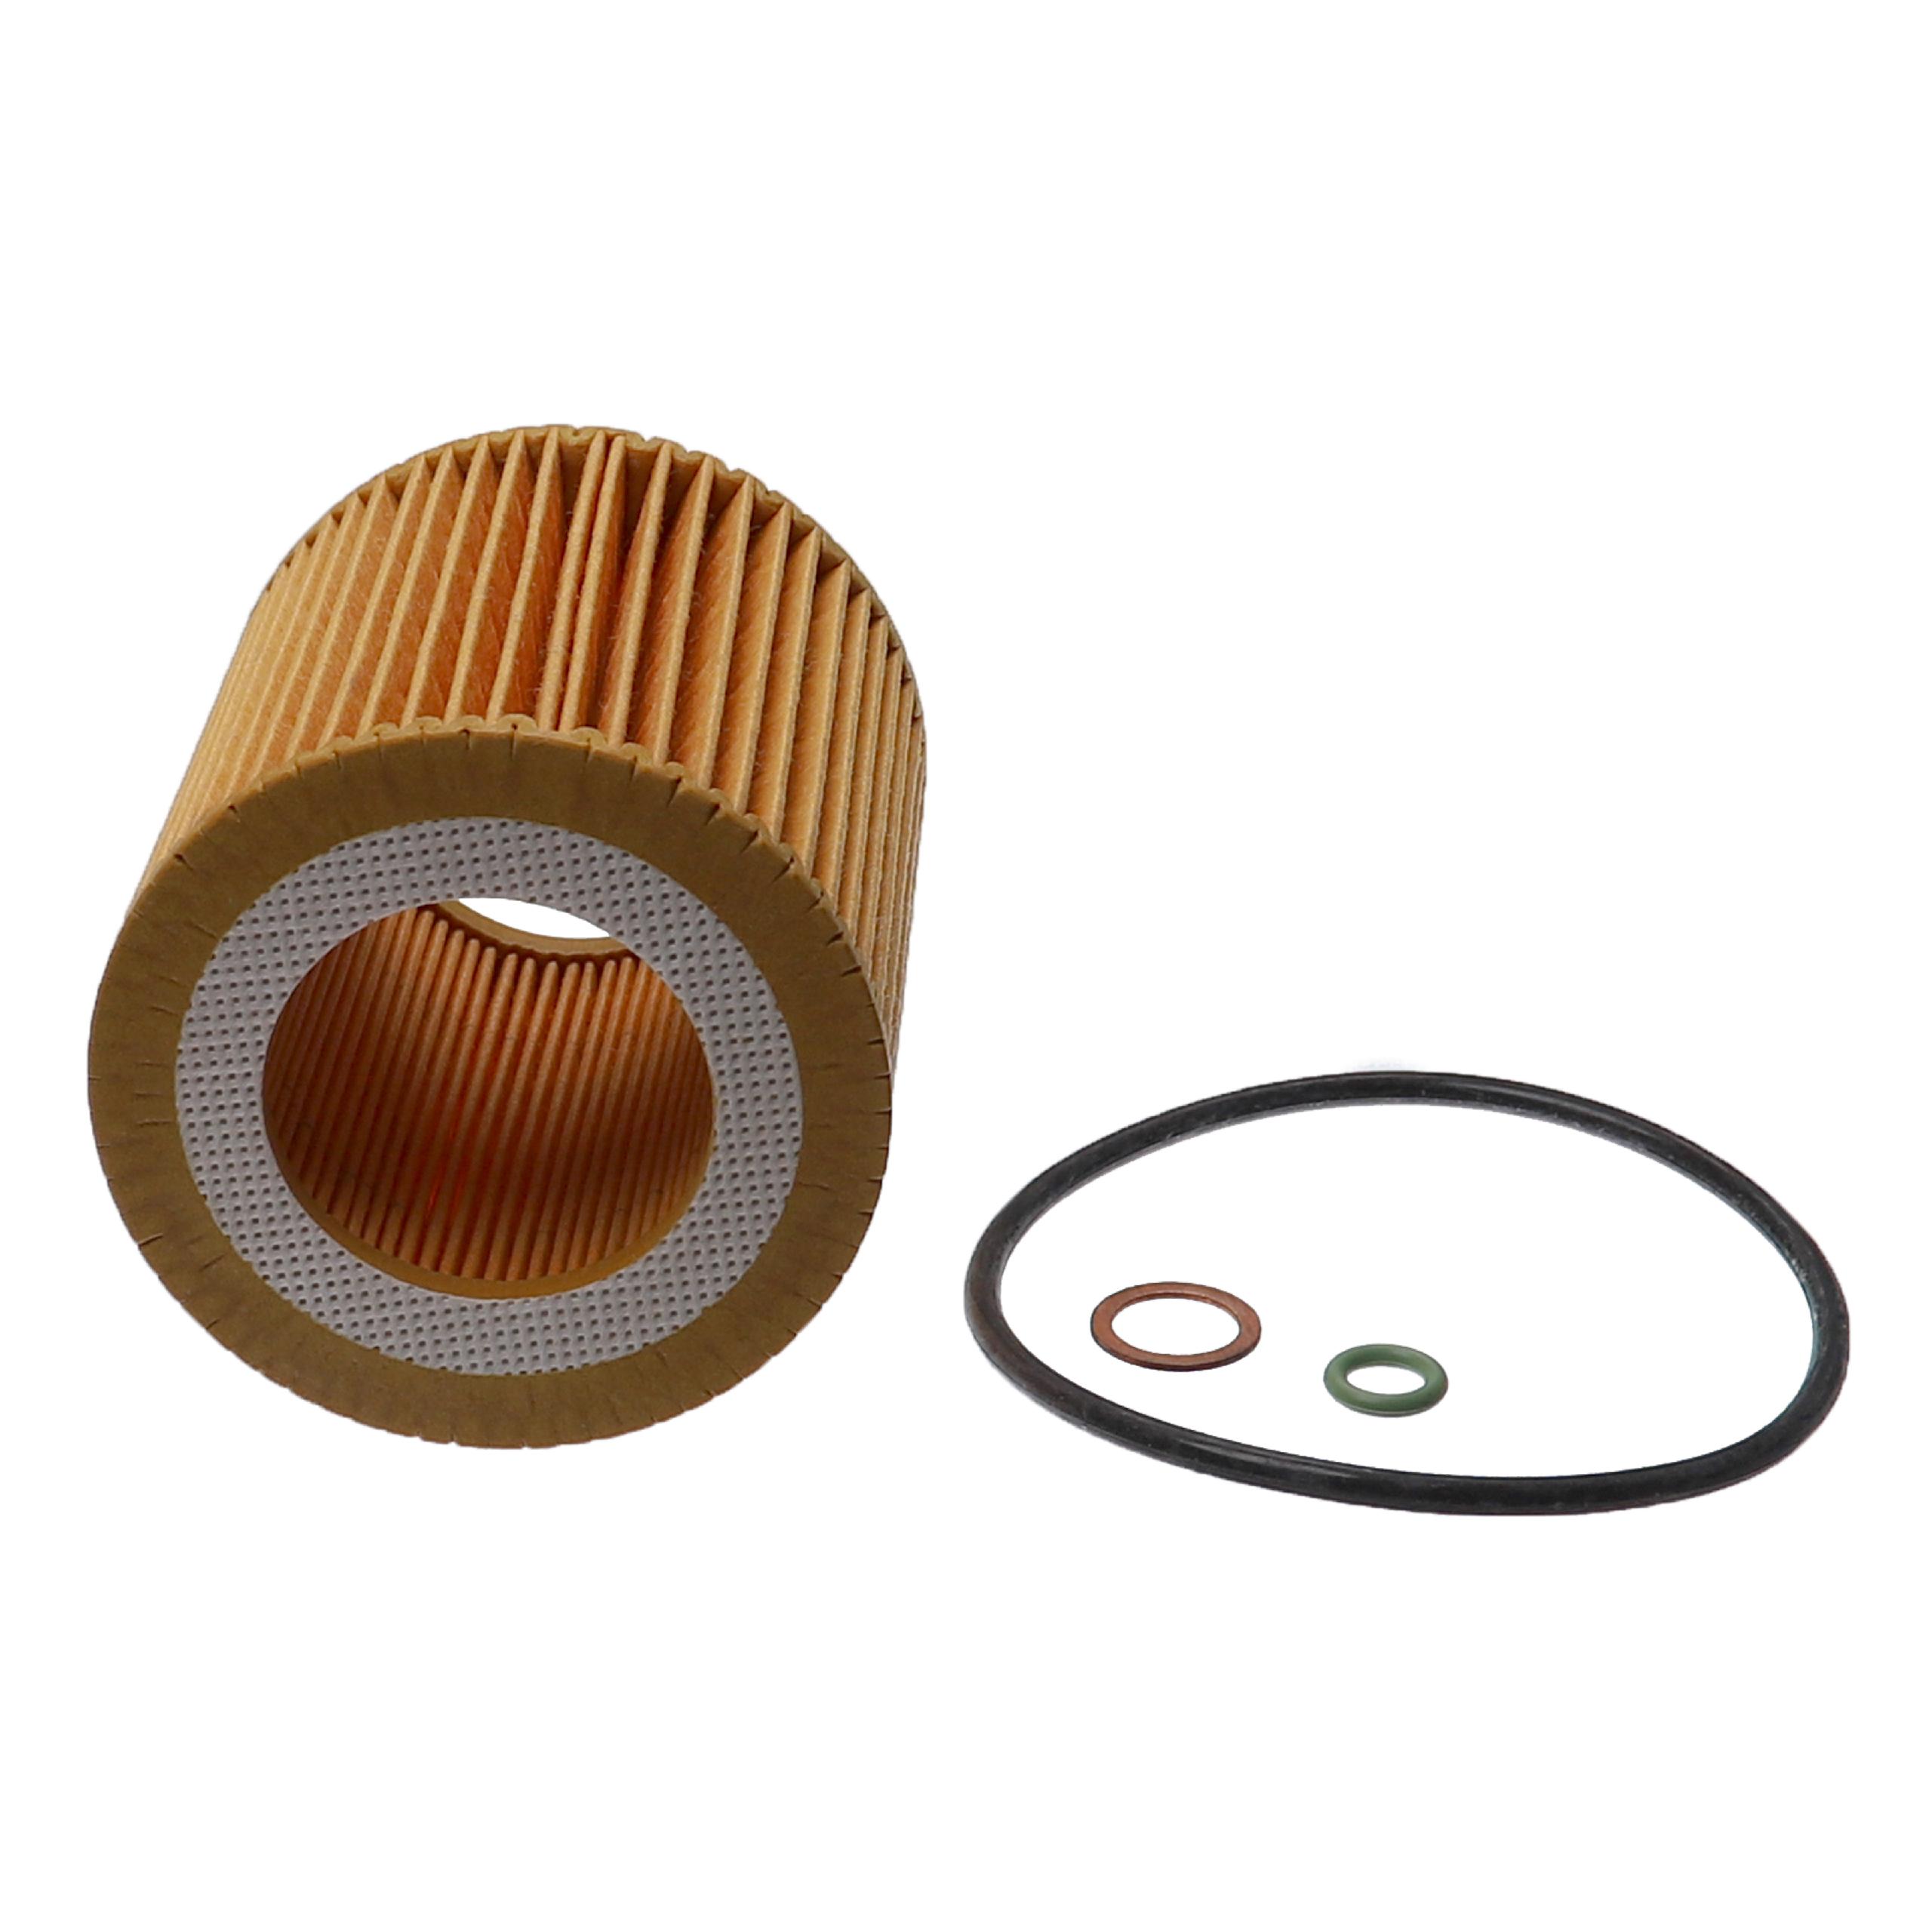 Vehicle Oil Filter as Replacement for ACDelco AC 6281 E - Spare Filter